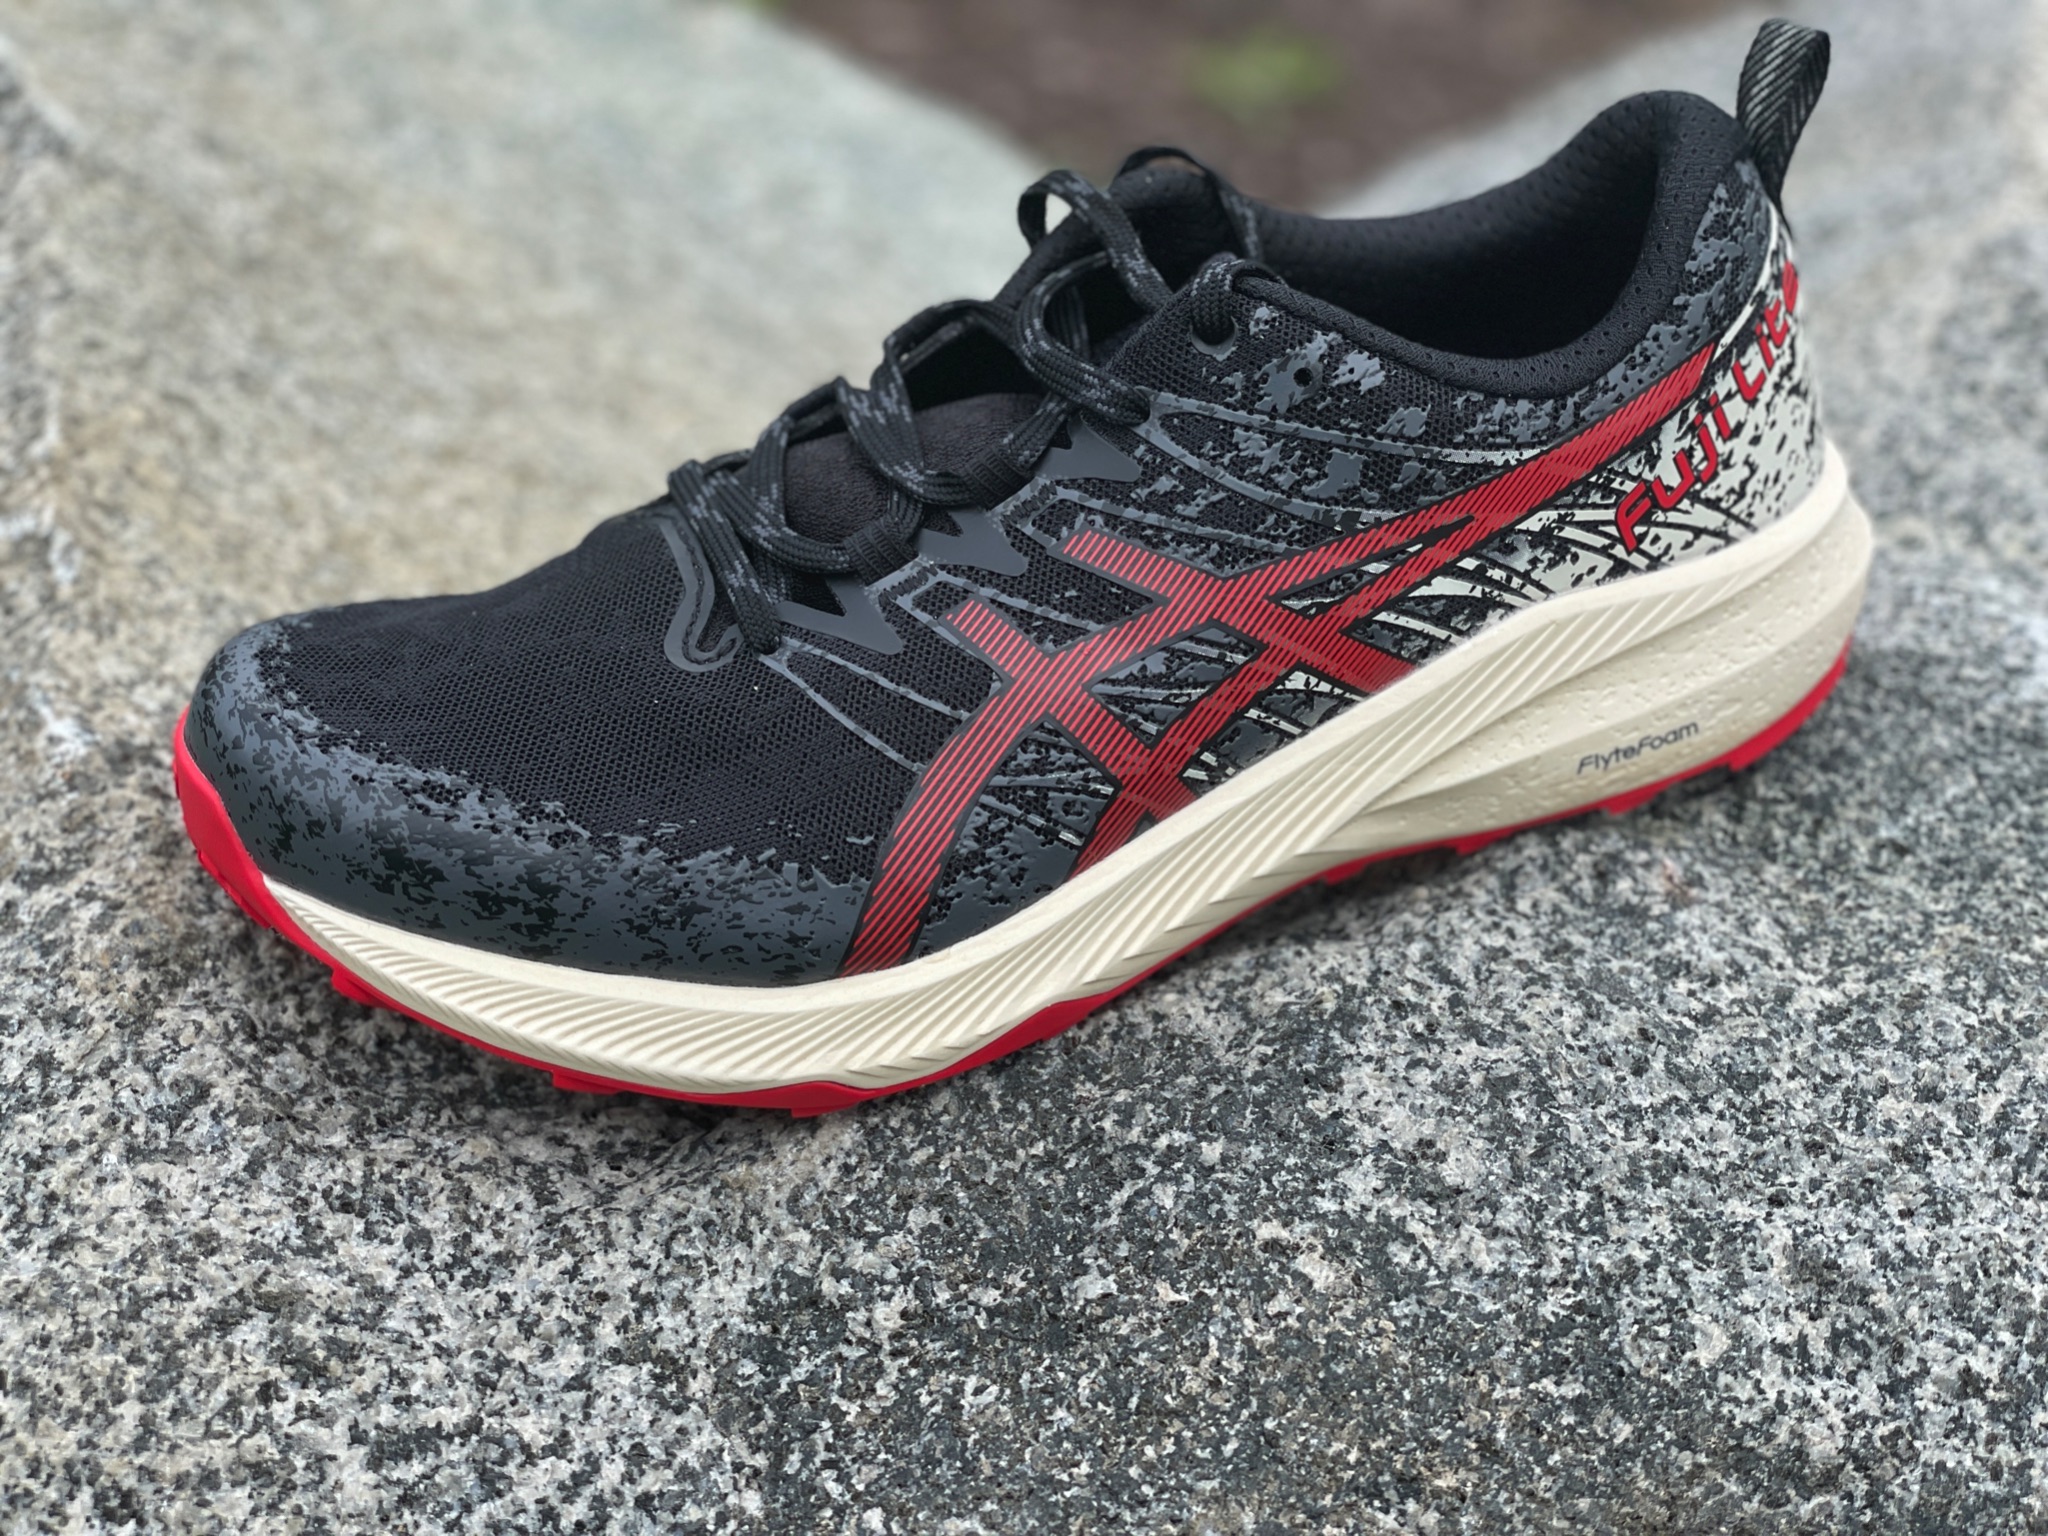 Unidad Tiza Elástico Road Trail Run: ASICS Fuji Lite 2 Multi Tester Review: Fun and Energetic  Trail (& Road) Speedster, 16 comparisons.